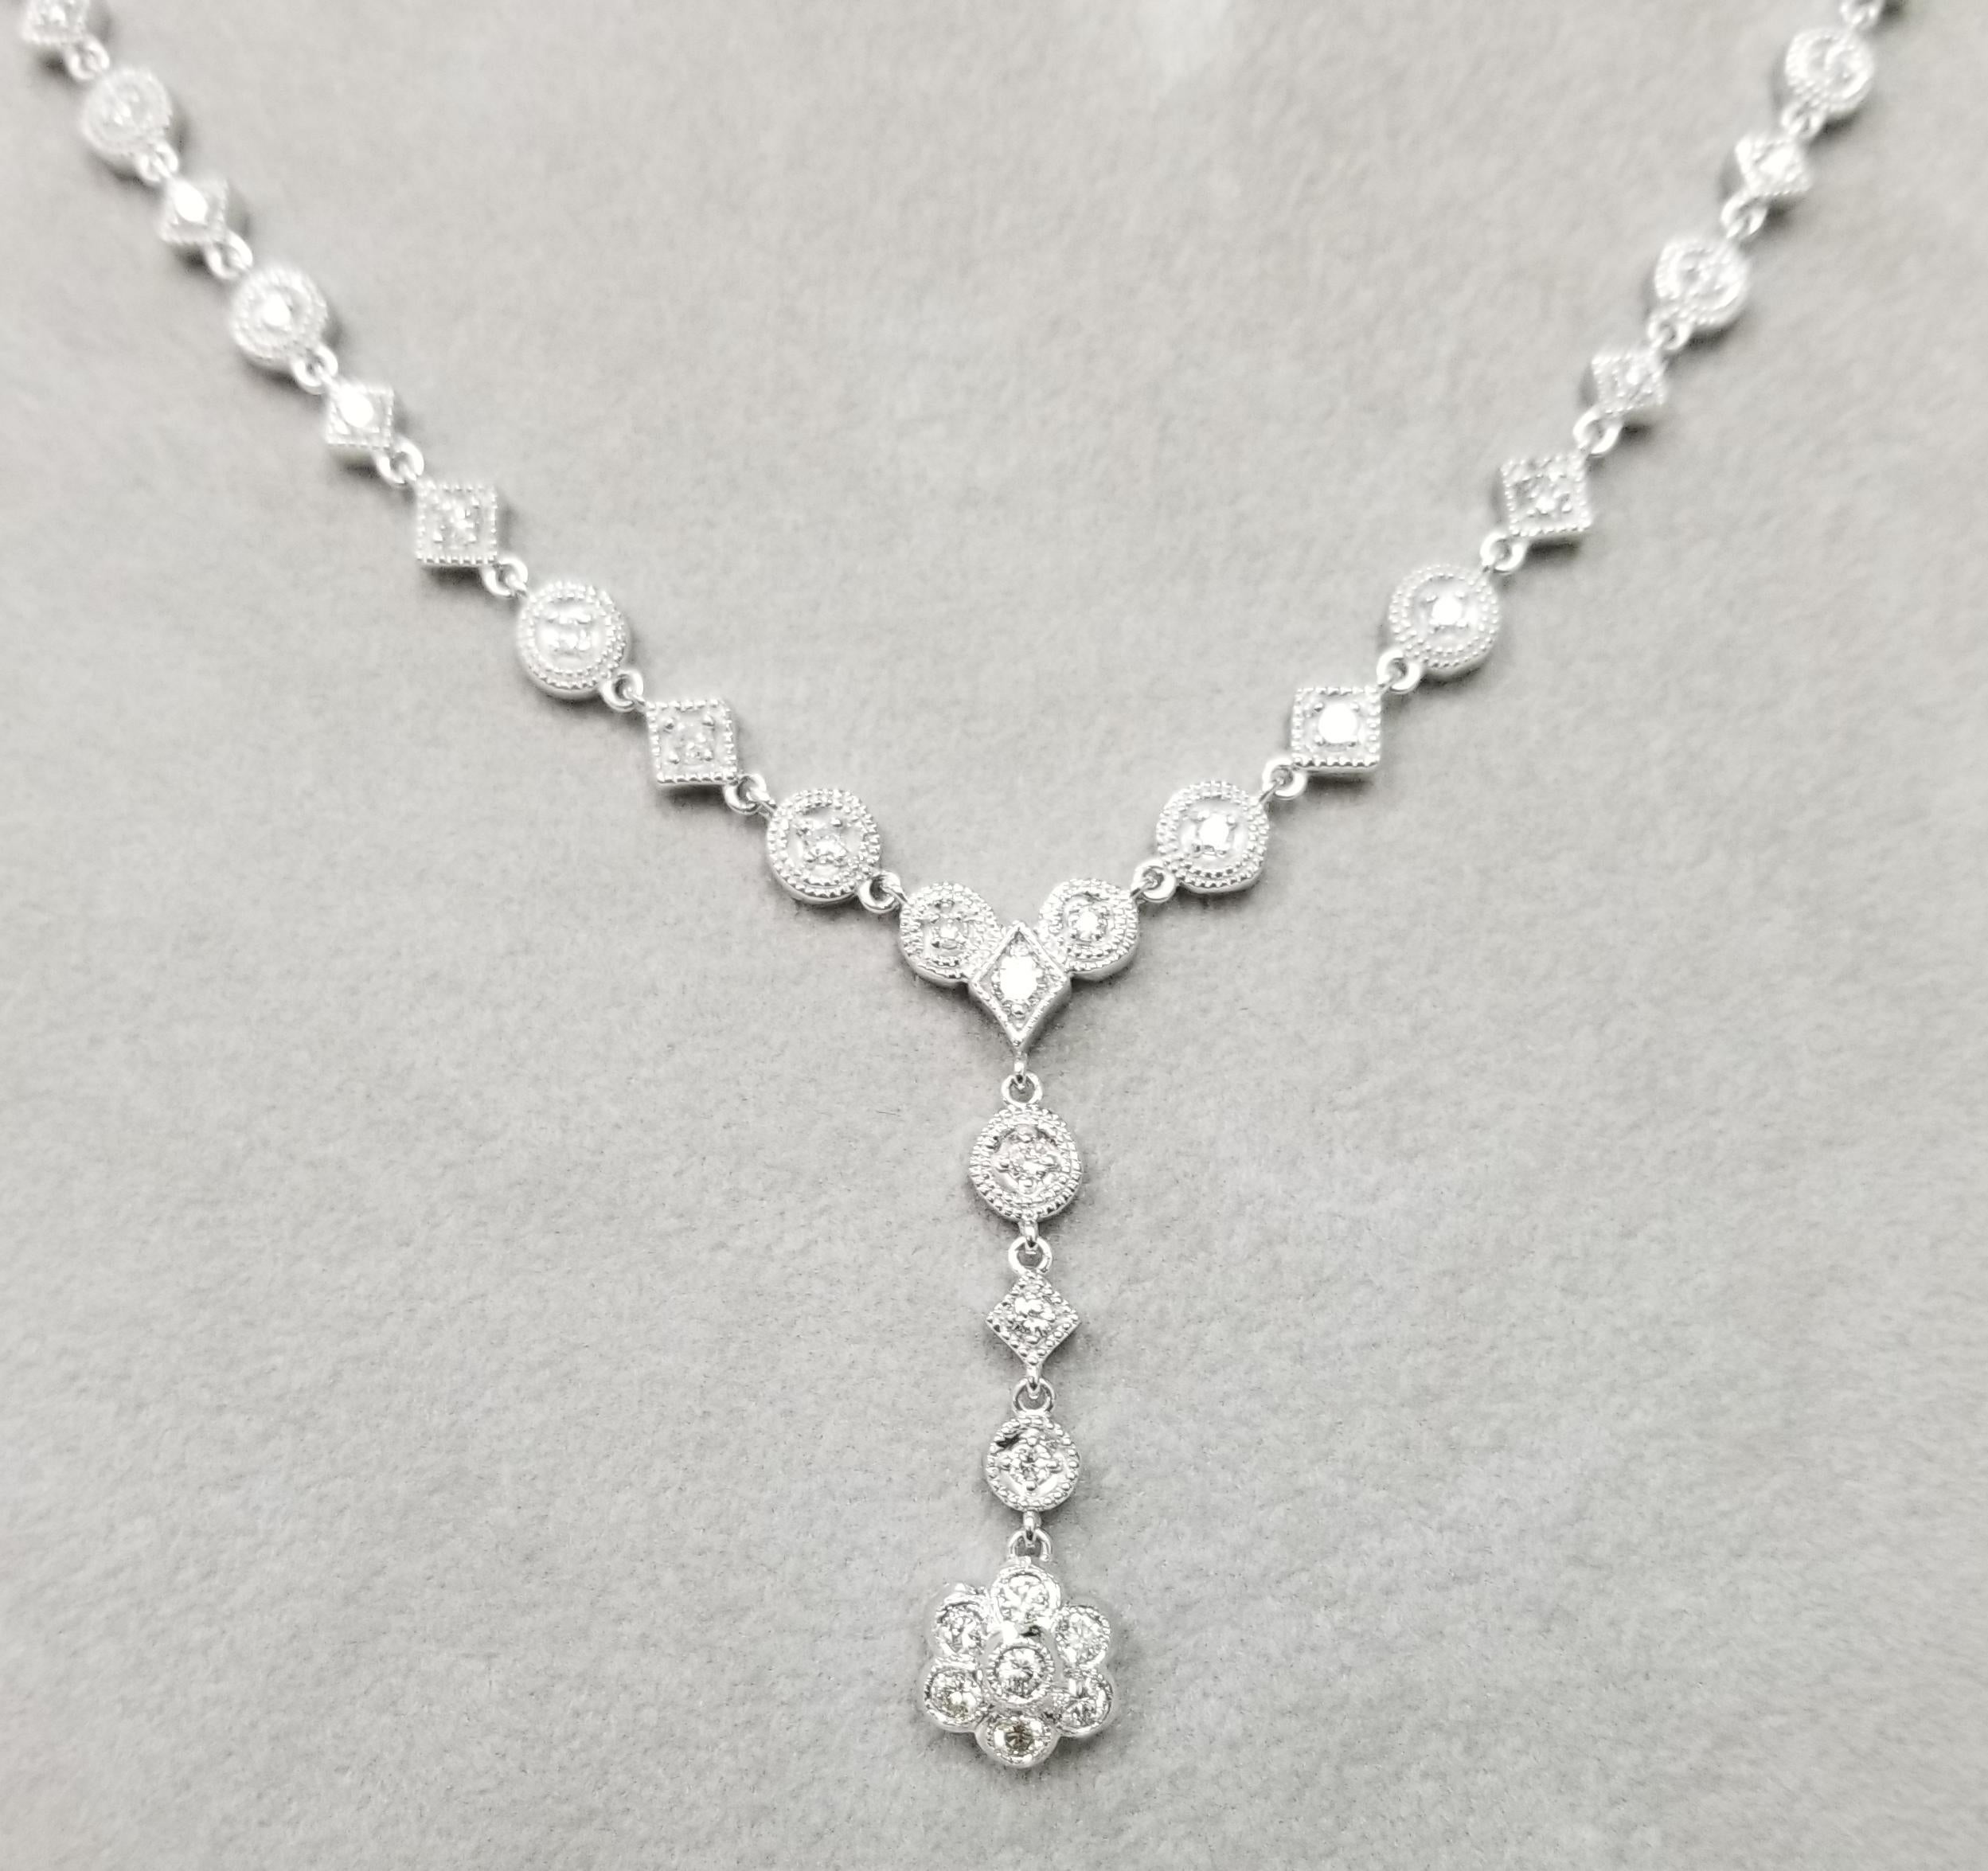 14k white gold diamond necklace, containing 
 Specifications:
    main stone: ROUND CUT DIAMONDS
    diamonds: 69 PIECES
    carat total weight: 2.51cts.    
    color: G
    clarity: VS2
    brand: custom
    metal:  14K GOLD
    type: TENNIS